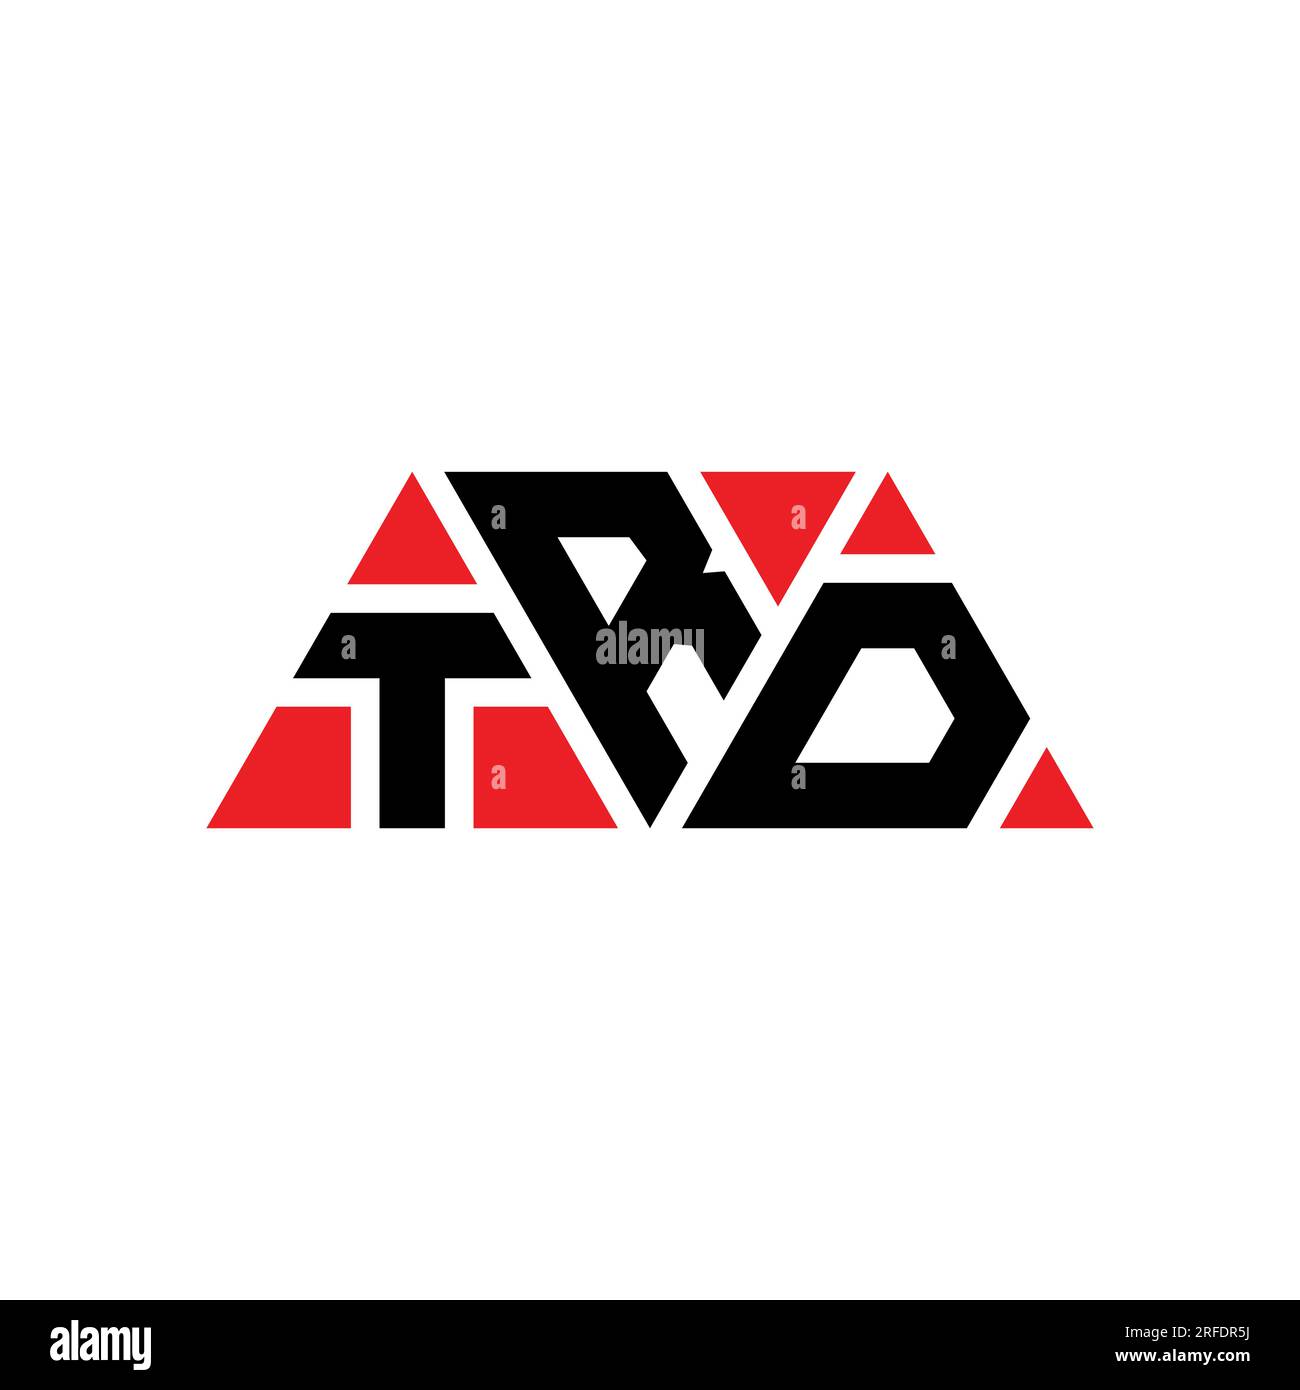 Trd font Stock Vector Images - Alamy